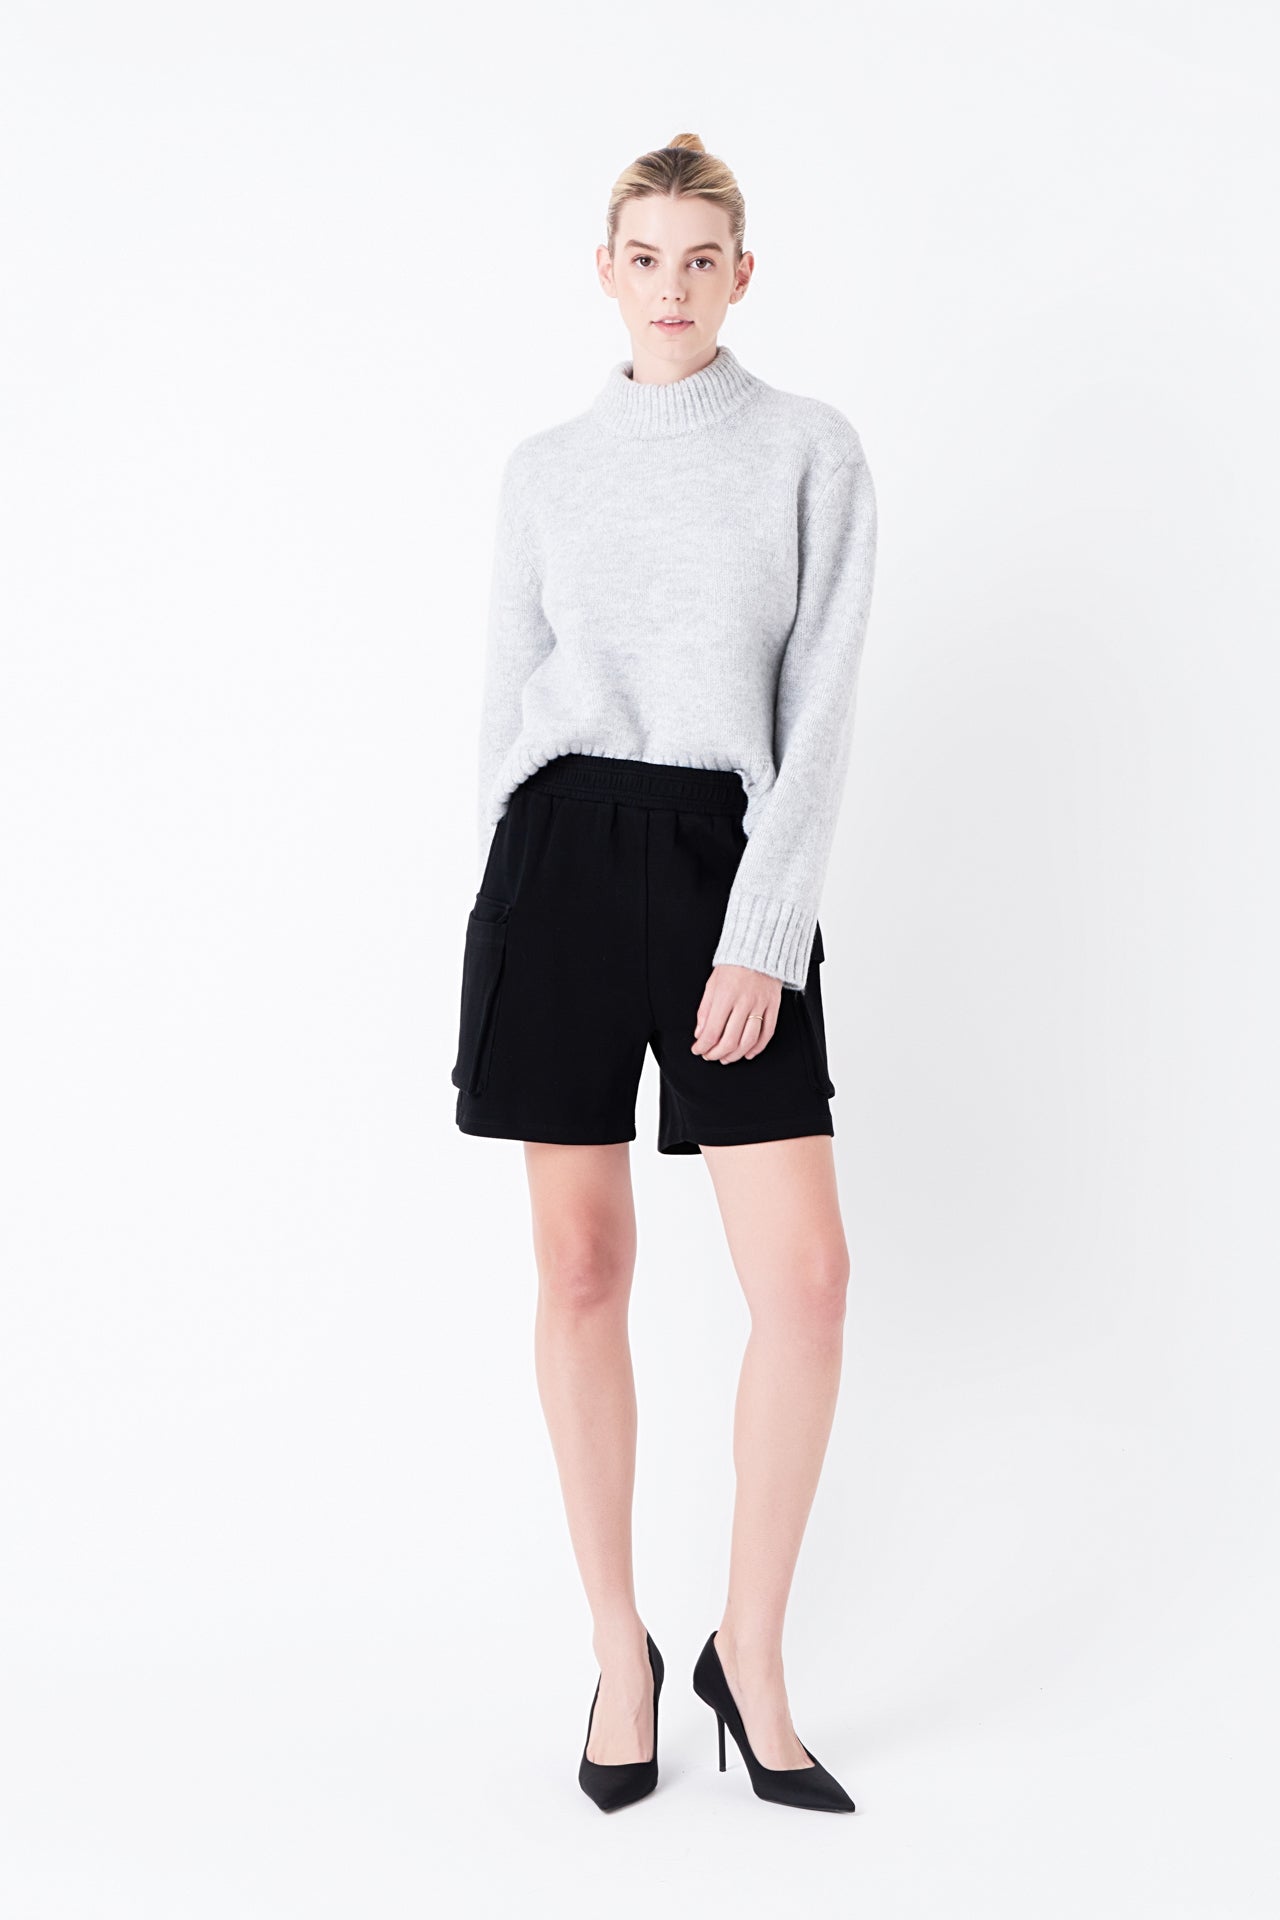 GREY LAB - Pullover Sweater - SWEATERS & KNITS available at Objectrare